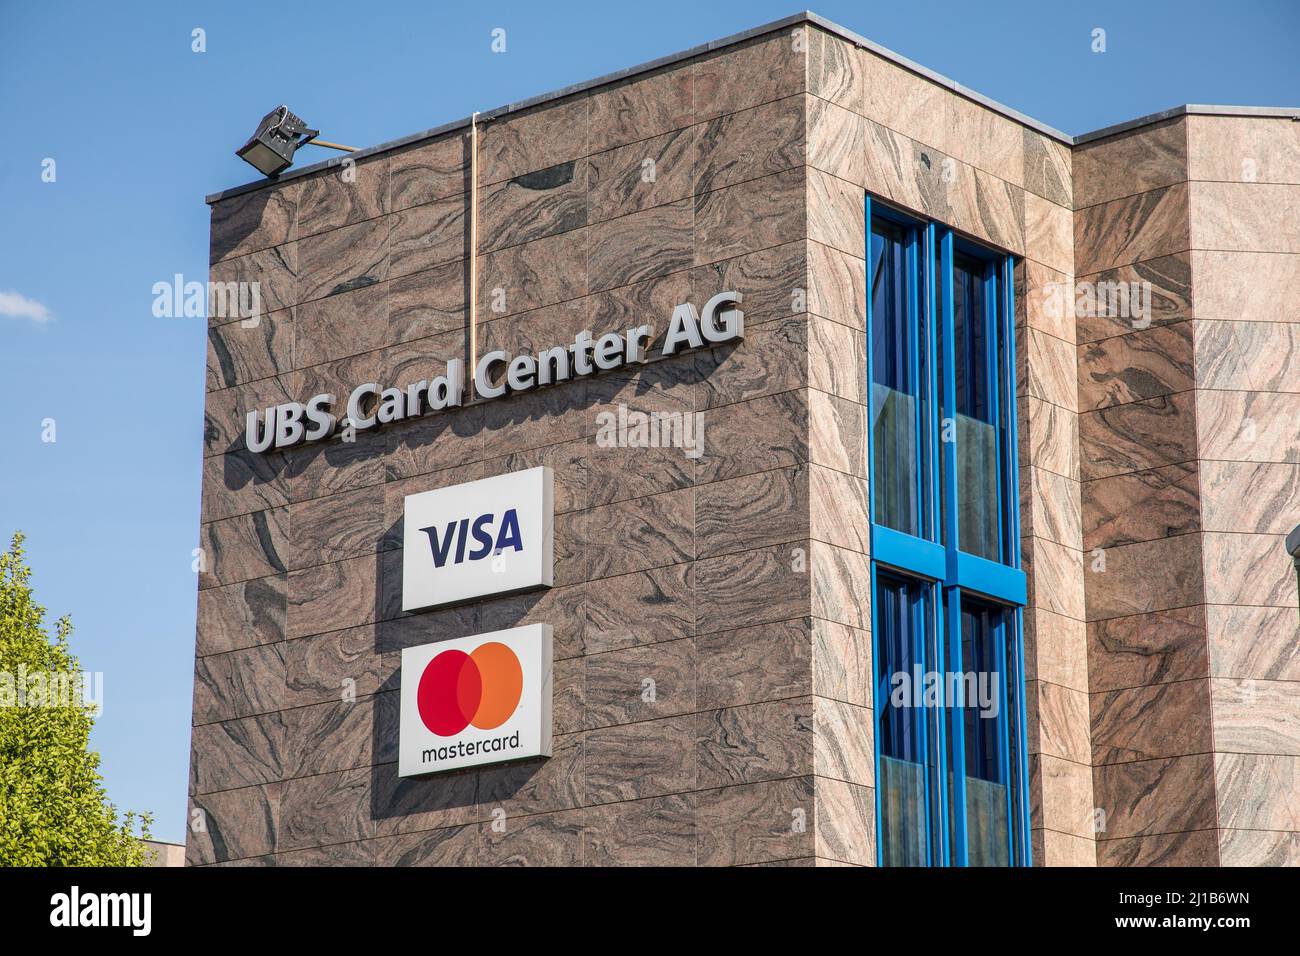 HEADQUARTERS OF THE DIVISION OF THE UBS BANK IN CHARGE OF HANDLING BANK CARD TRANSACTIONS, VISA, MASTERCARD, PAYMENTS BY DEBIT AND CREDIT CARDS, SECURE PAYMENT, OERLIKON, SUBURB OF ZURICH, CANTON OF ZURICH, SWITZERLAND Stock Photo